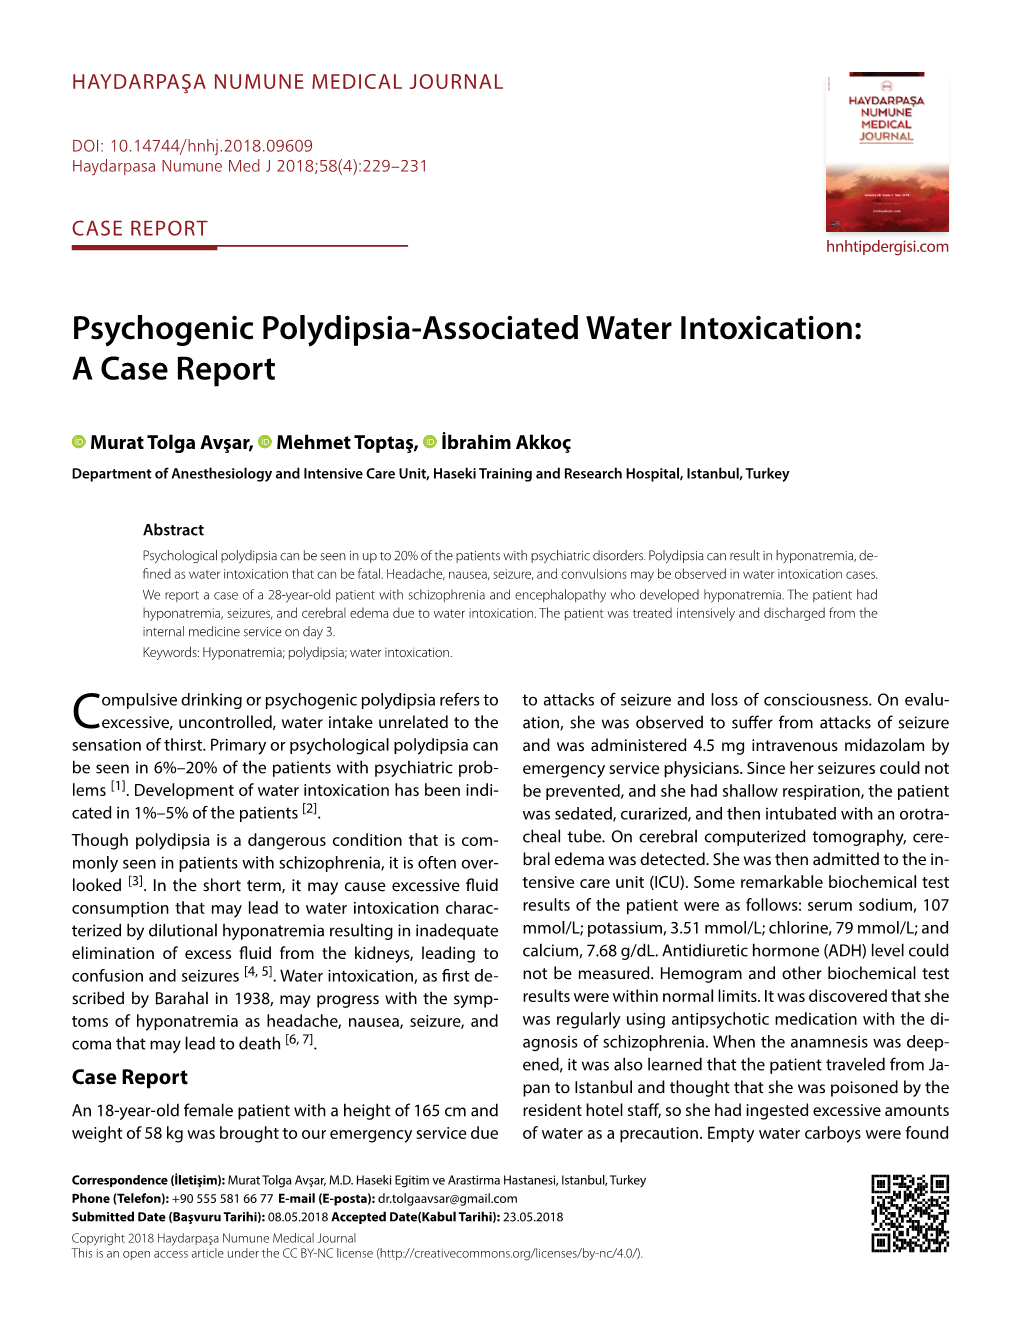 Psychogenic Polydipsia-Associated Water Intoxication: a Case Report